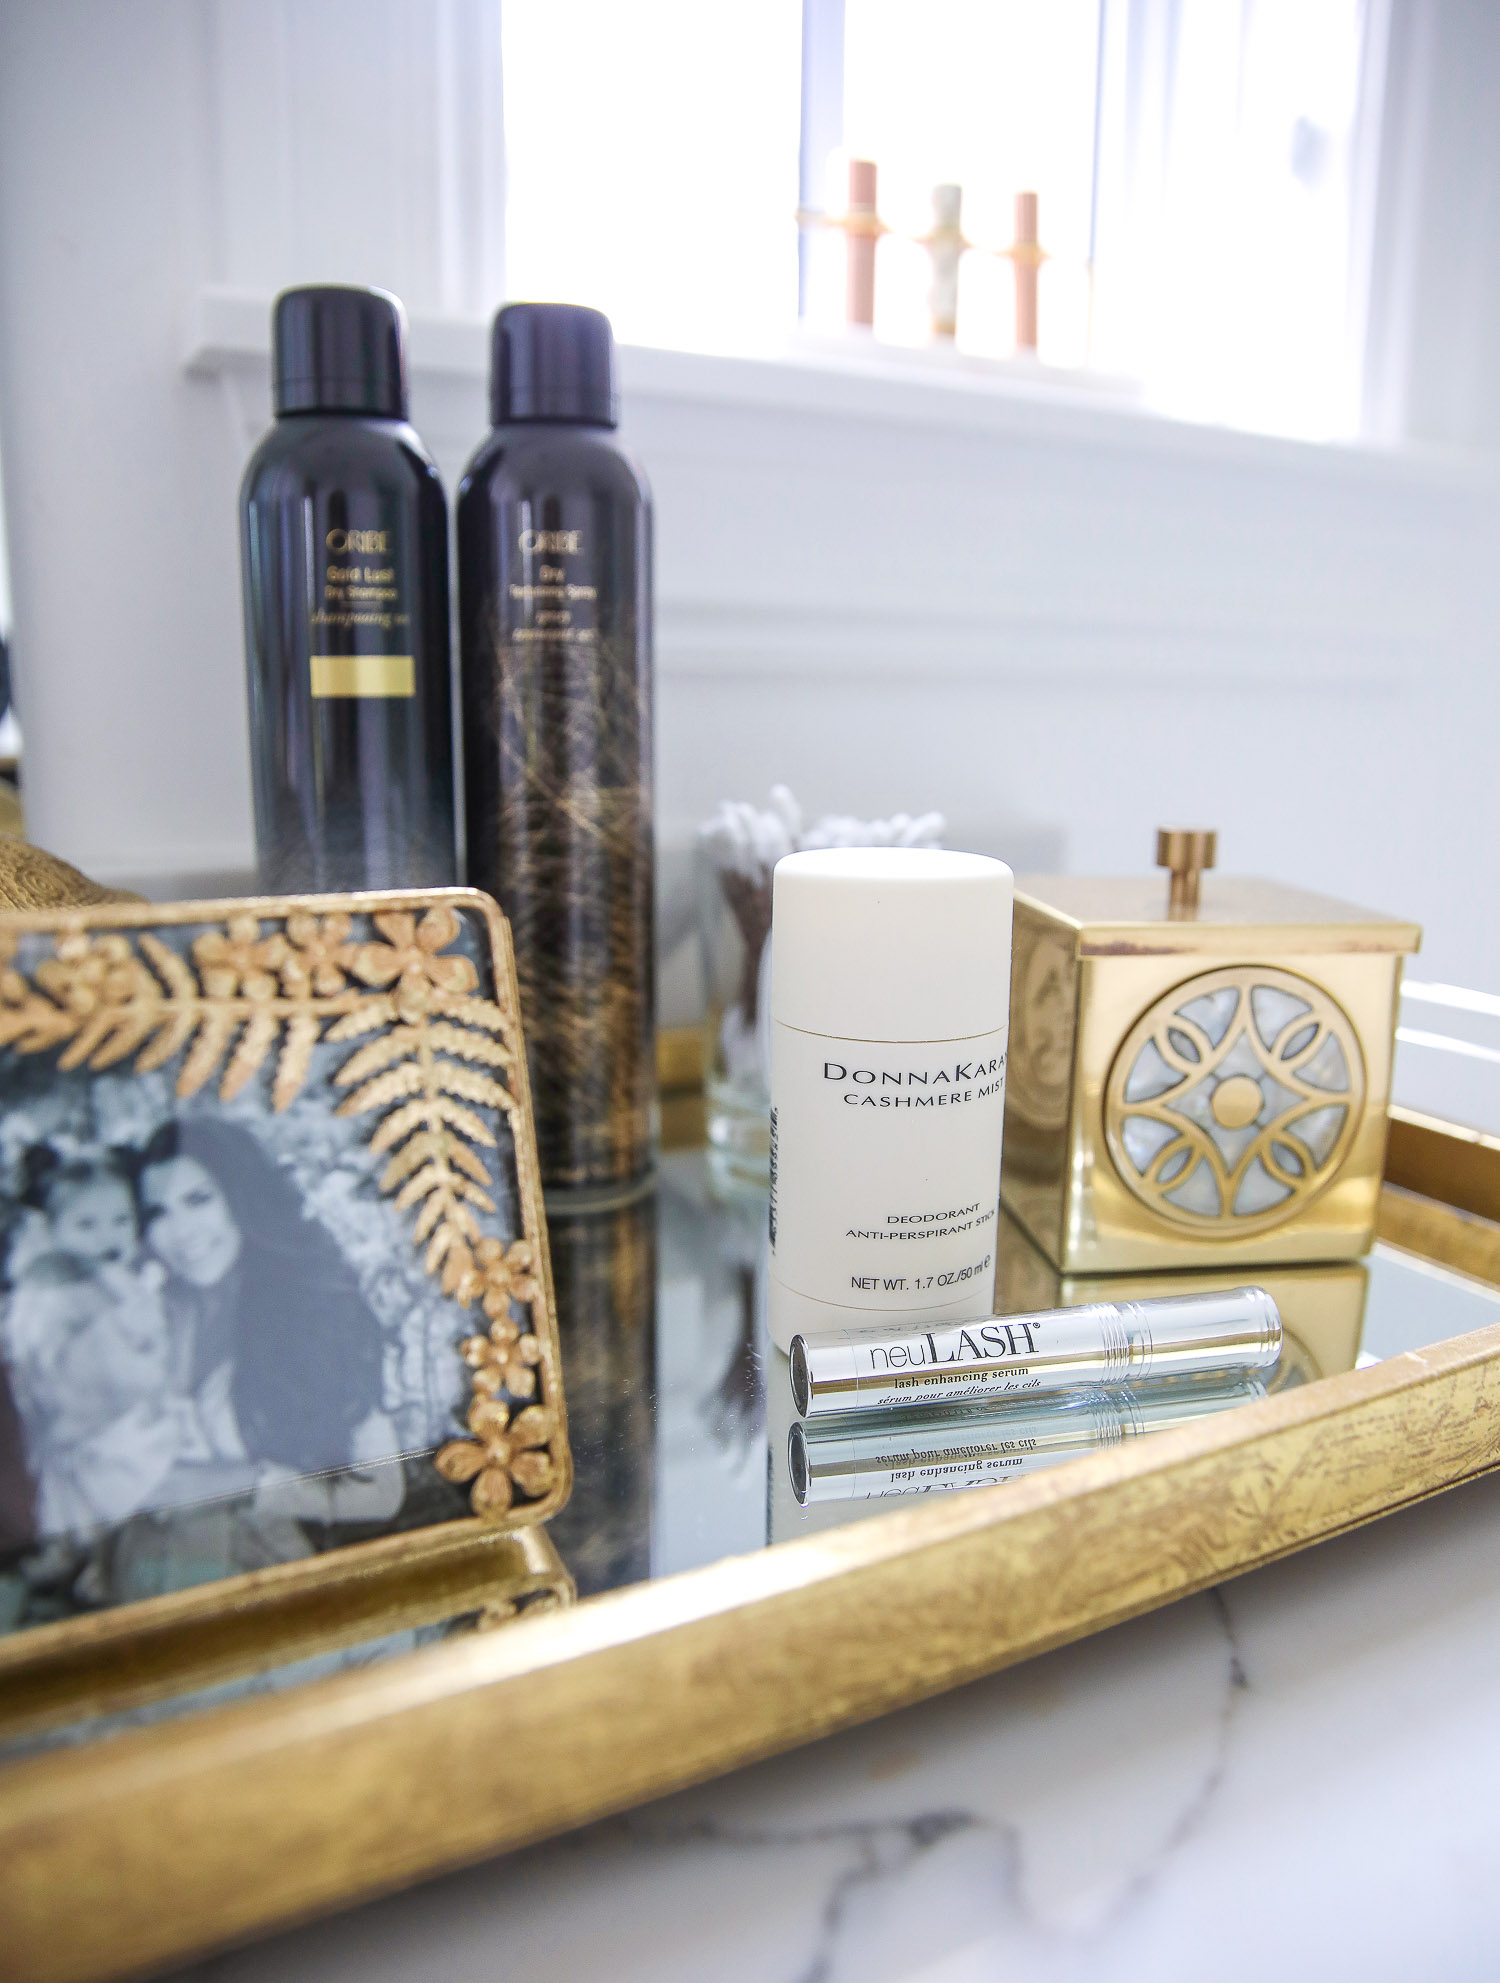 Emily gemma master bathroom, Nordstrom anniversary sale 2021 beauty must haves, anthropologie bathrom decor 2021, pinterest bathroom all white gold | Nordstrom Anniversary Sale 2021 by popular US life and style blog, The Sweetest Thing: image of a gold metal and mirrored tray with Oribe dry texture spray bottles, Donna Karan Cashmere beauty product, neu lash mascara, and gold picture frame with a black and white family photo. 